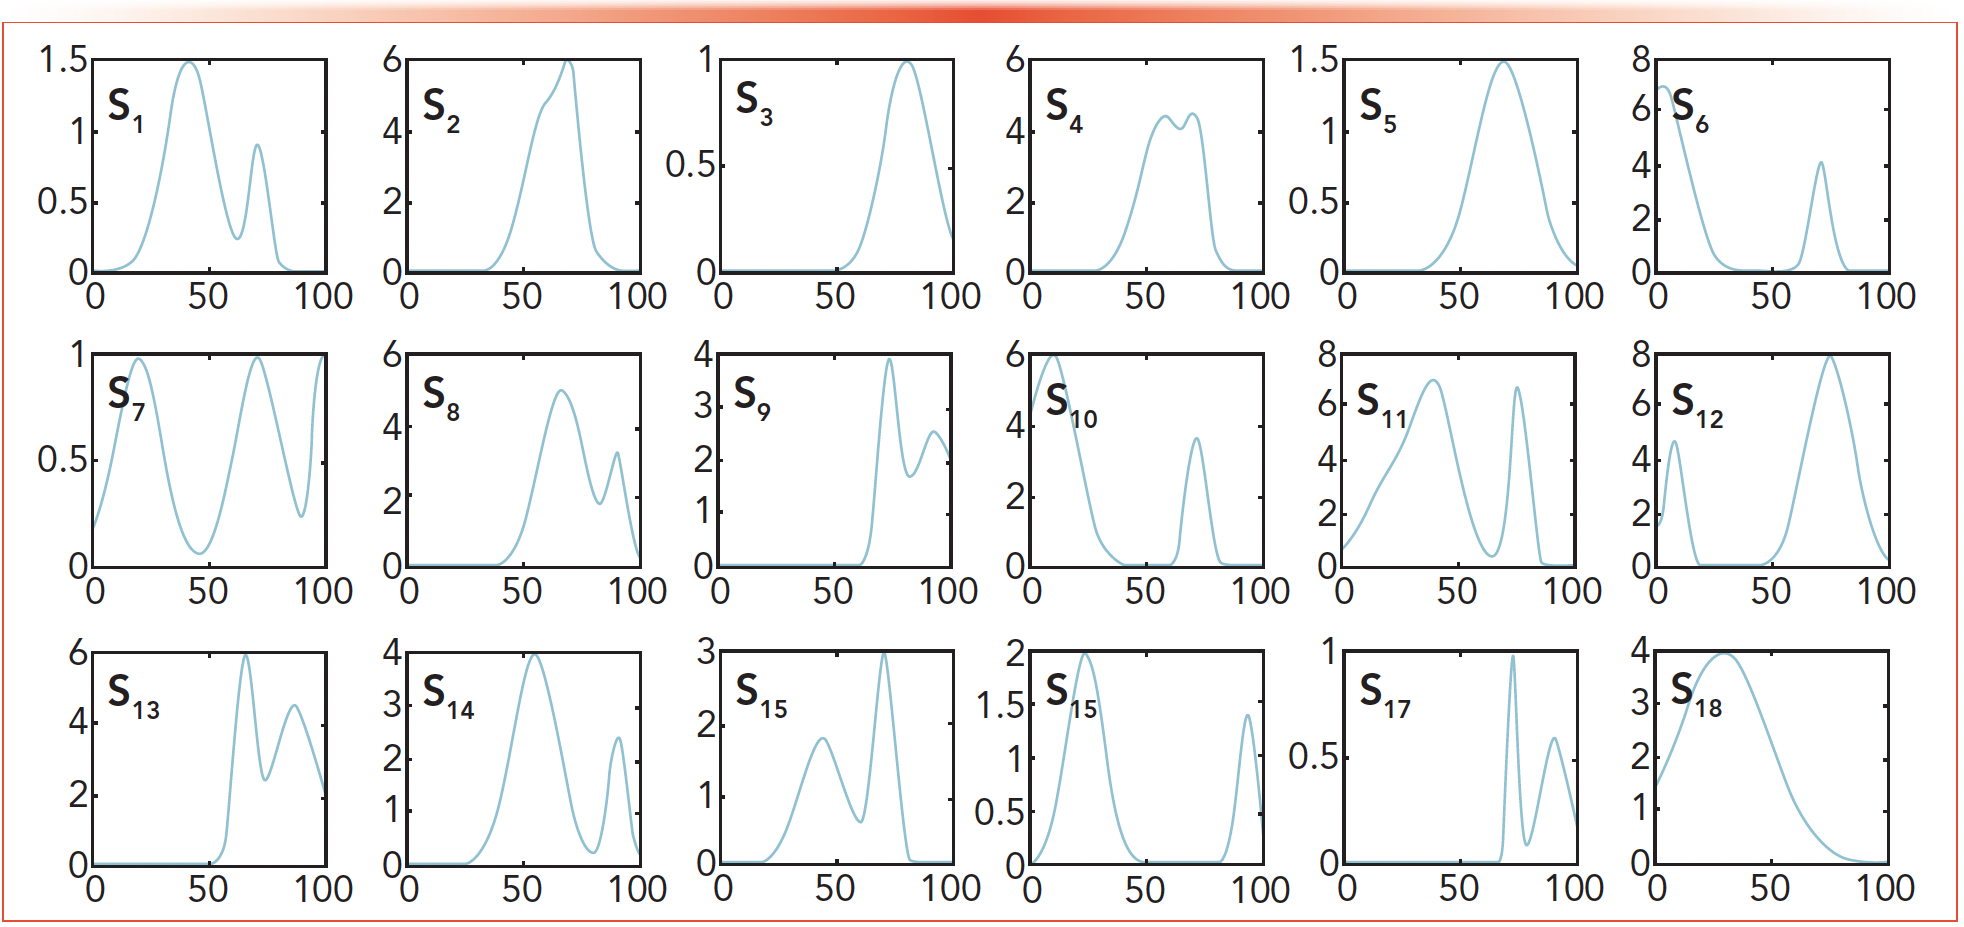 FIGURE 4: 18 spectra for simulations S1 through S18.